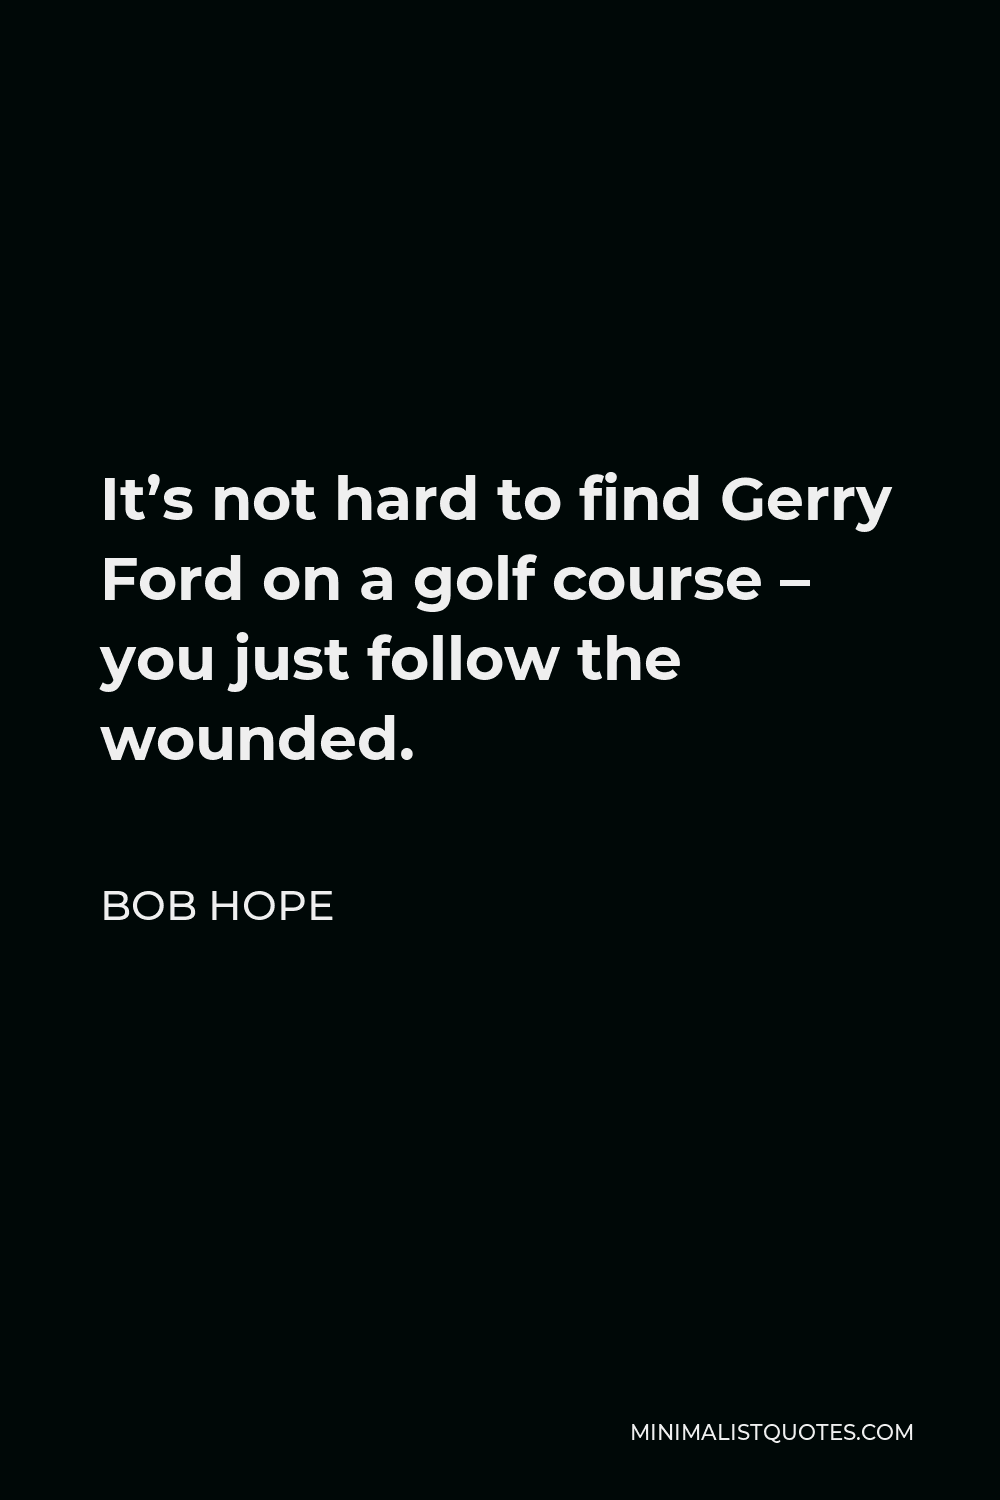 Bob Hope Quote - It’s not hard to find Gerry Ford on a golf course – you just follow the wounded.